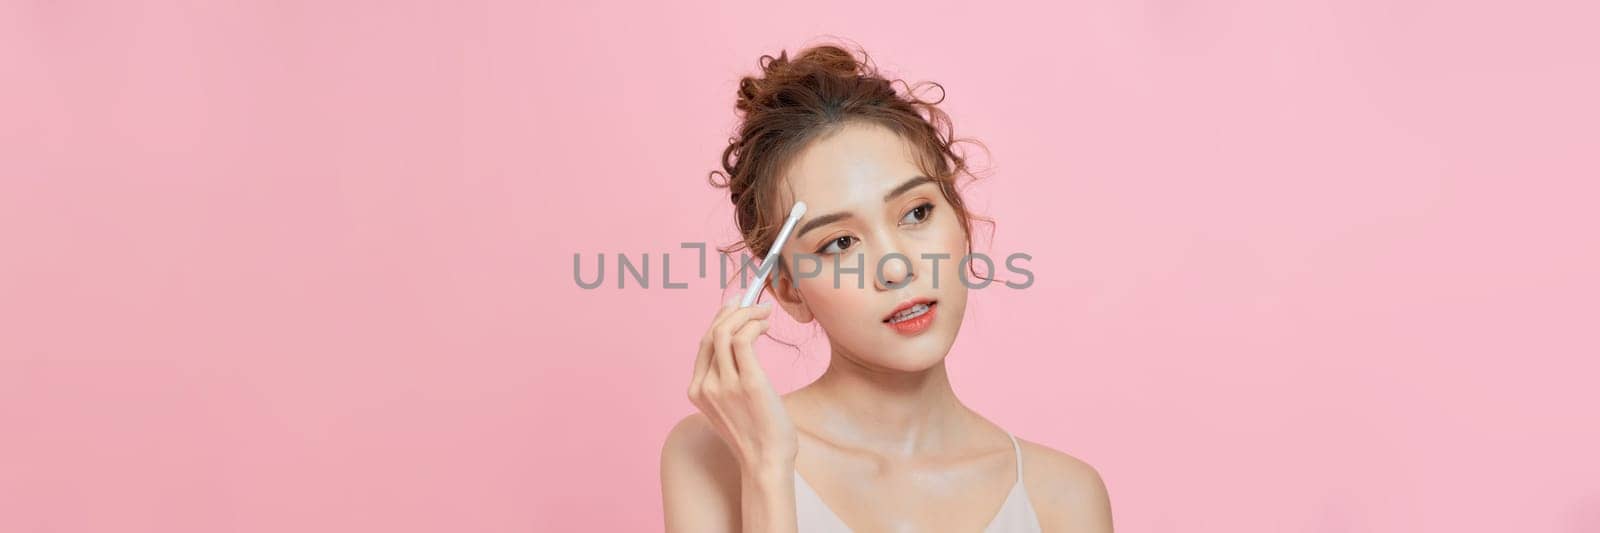 Beautiful young fresh happy girl with a cute smile holds a brush near face on a pink background by makidotvn